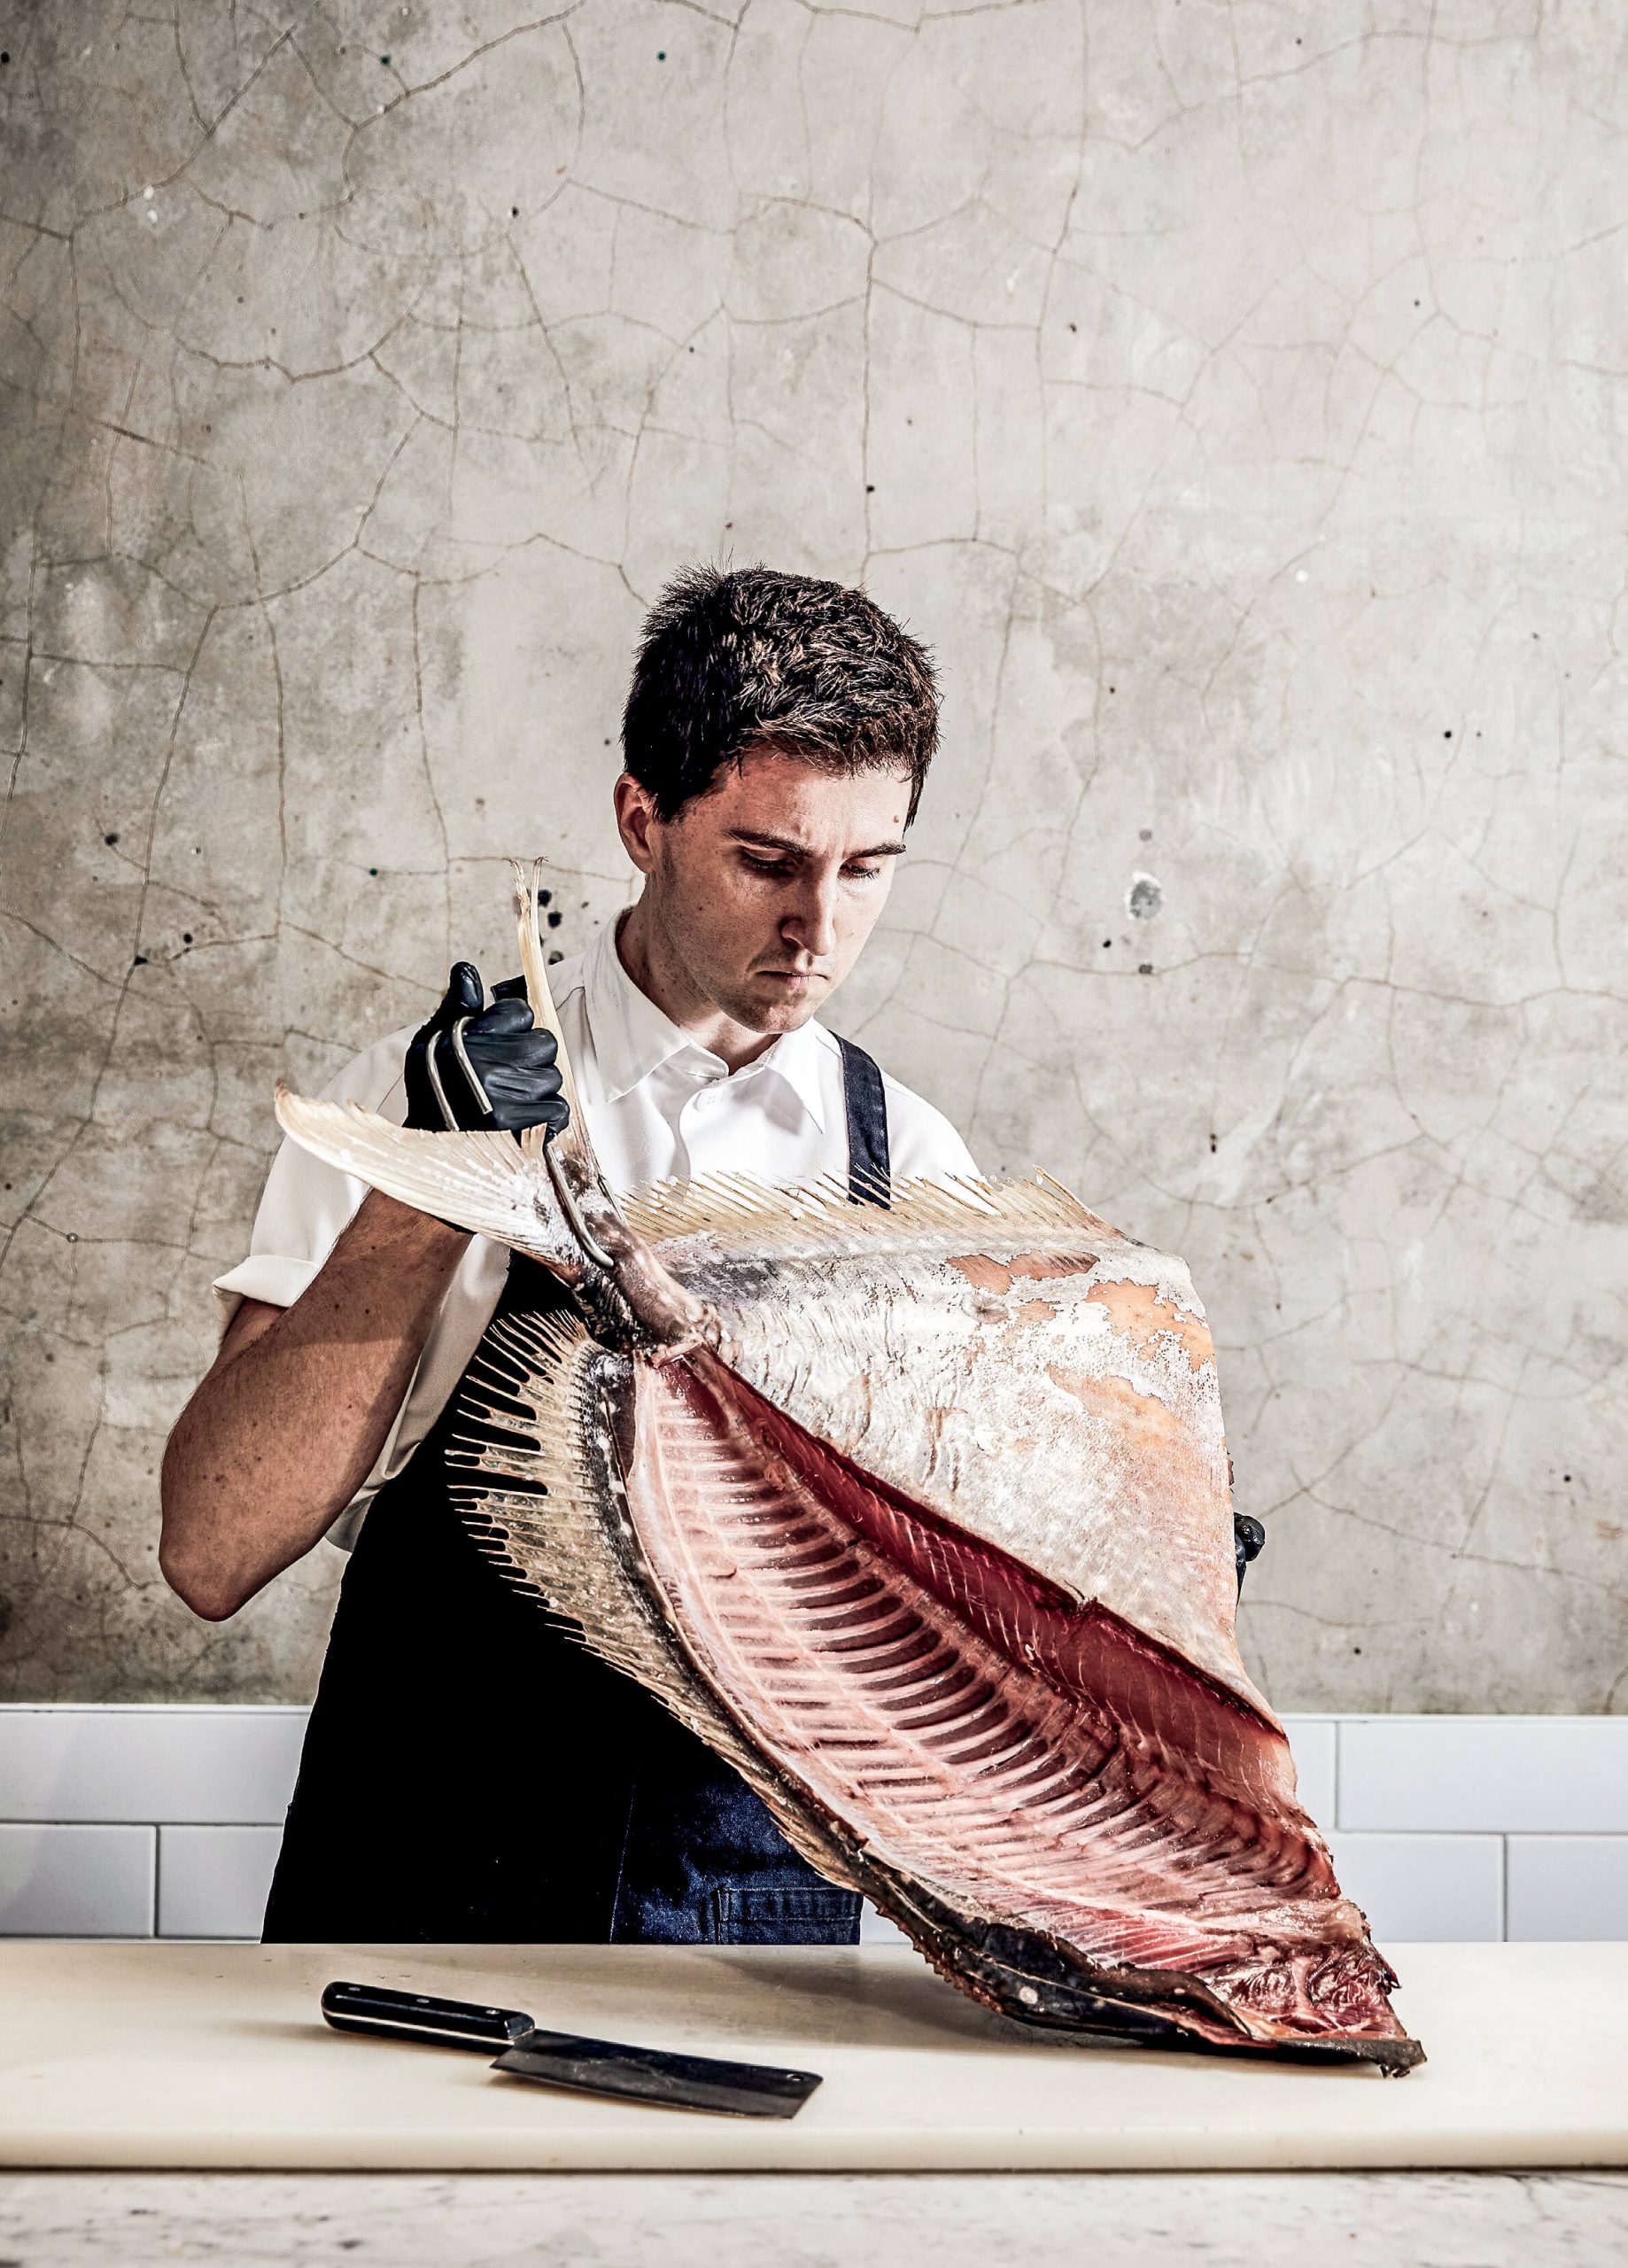 Josh Niland - a luminary when it comes to the holistic processing and dry aging of fish 